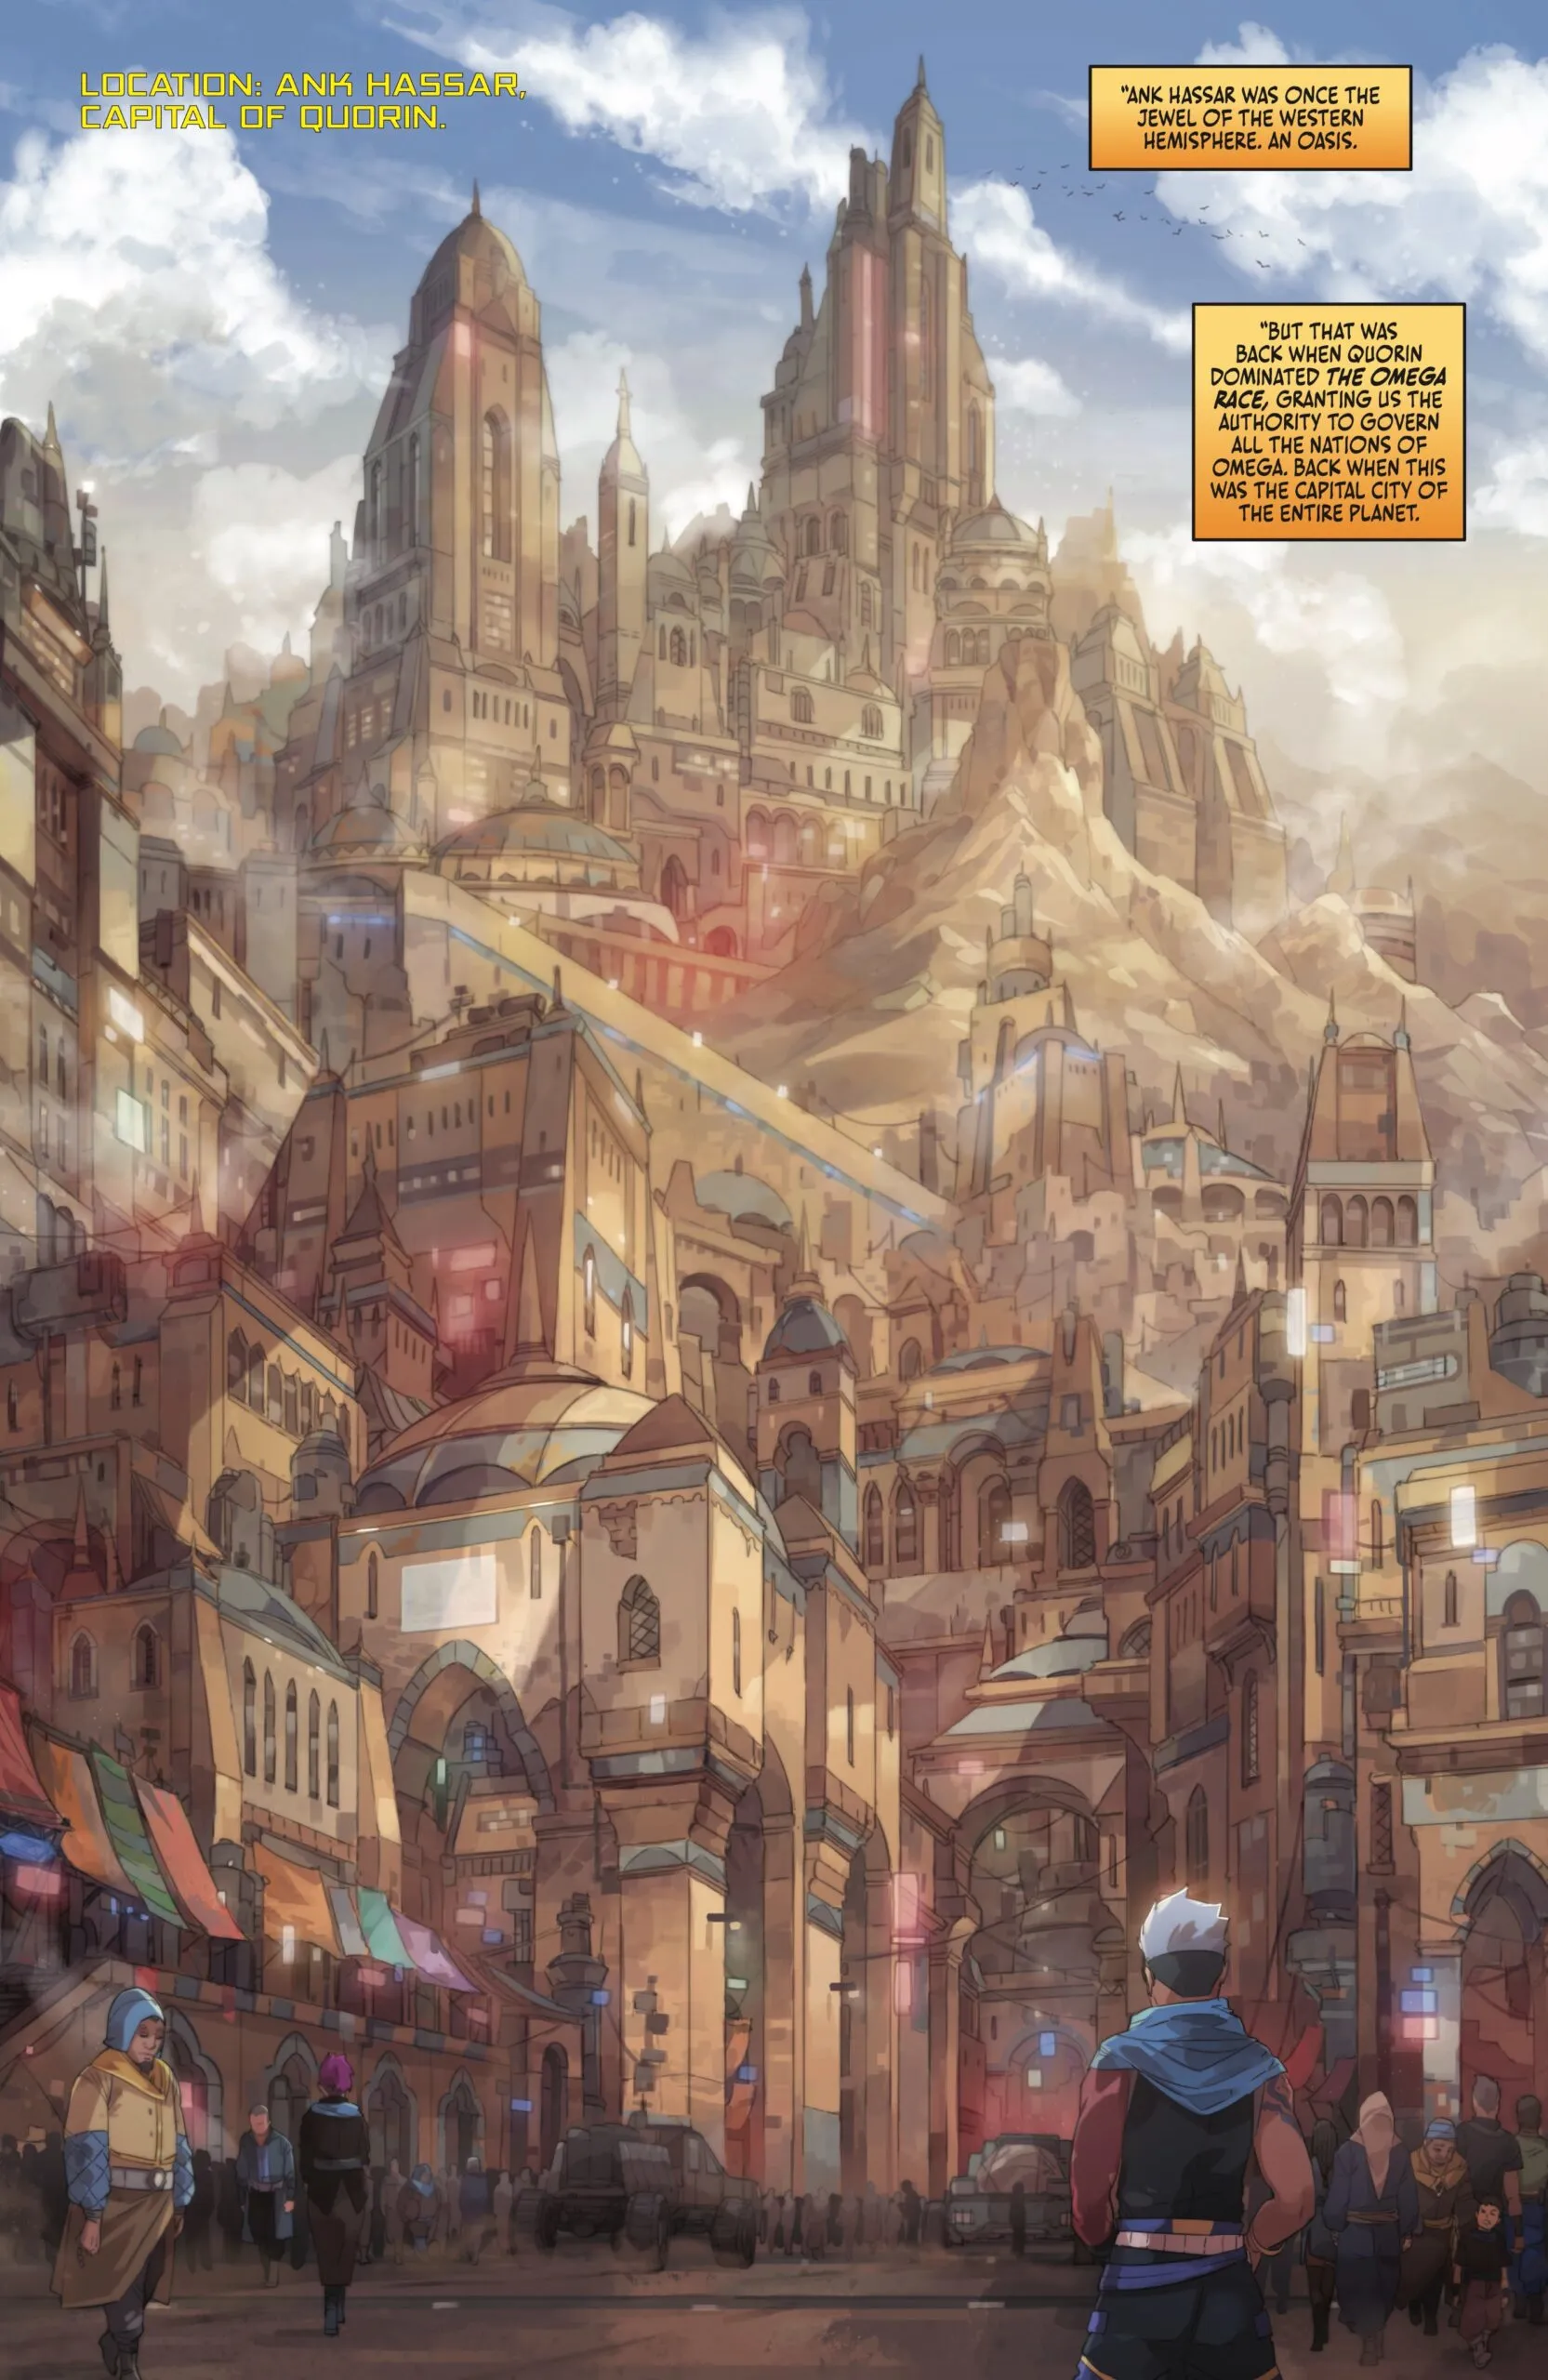 Illustration of town with castles in futuristic society.